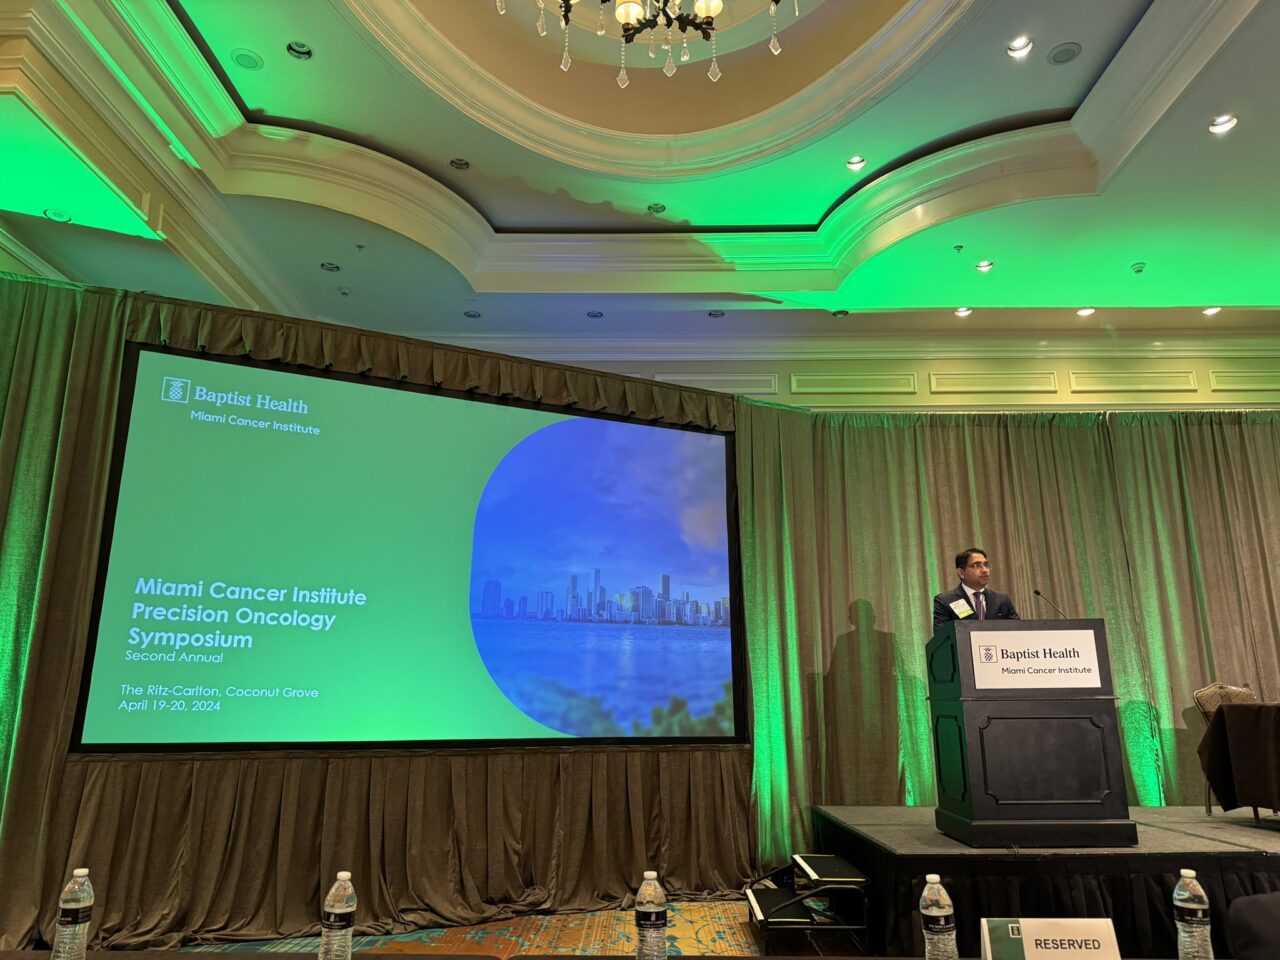 Mainak Bardhan: Miami Cancer Institute Research Precision Oncology symposium 2nd Annual at The Ritz Carlton spearhead by one and only Manmeet Ahluwalia